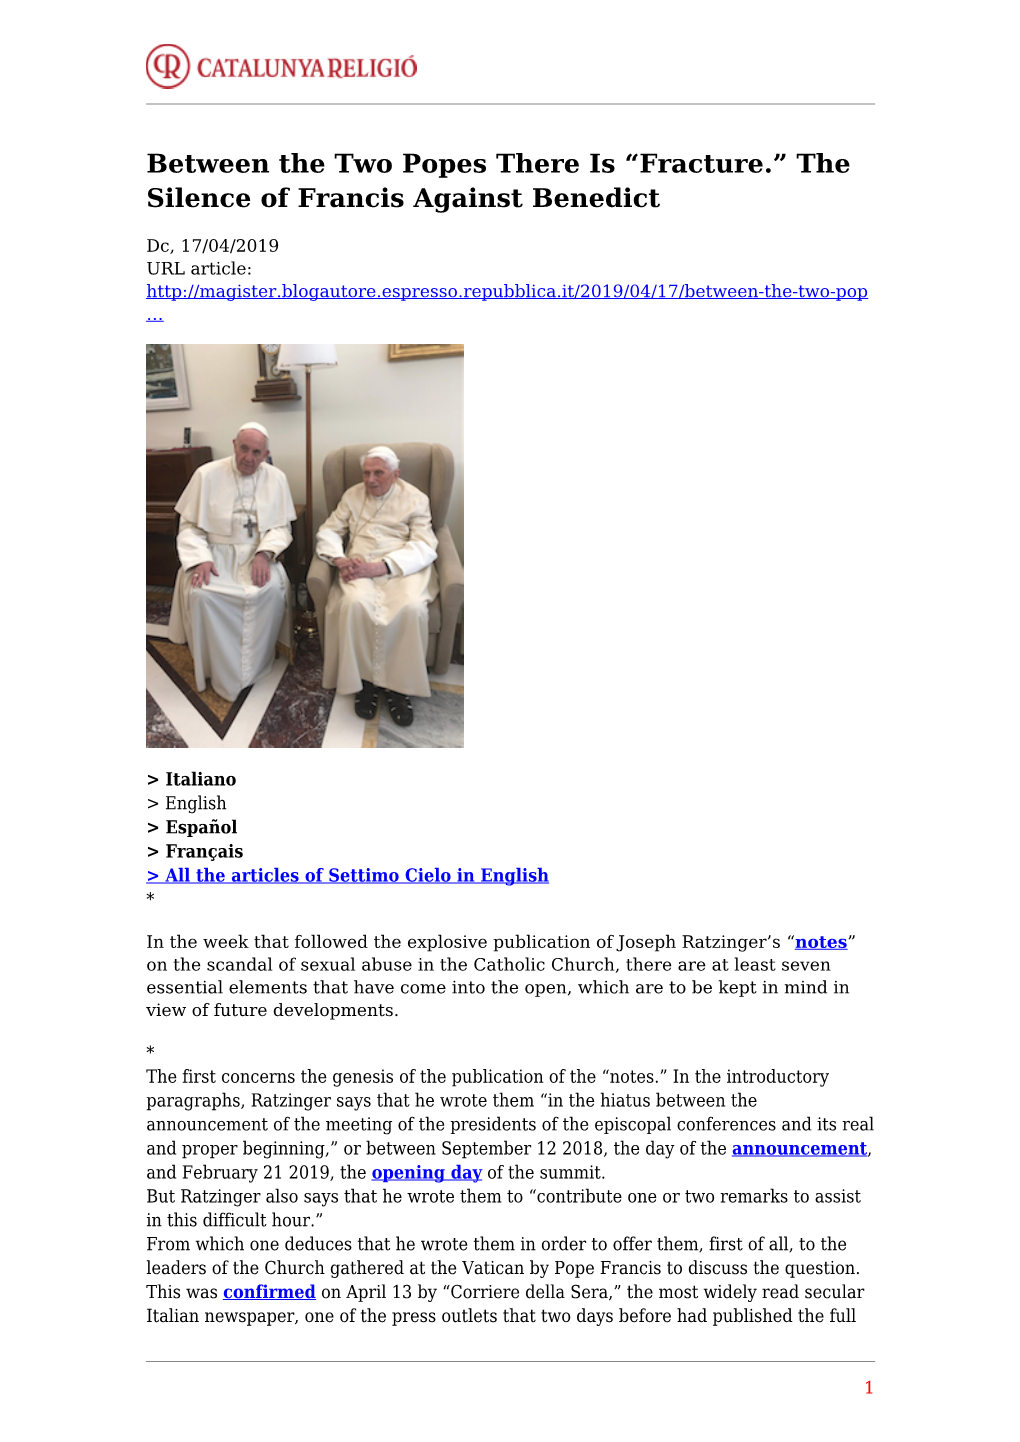 Between the Two Popes There Is “Fracture.” the Silence of Francis Against Benedict